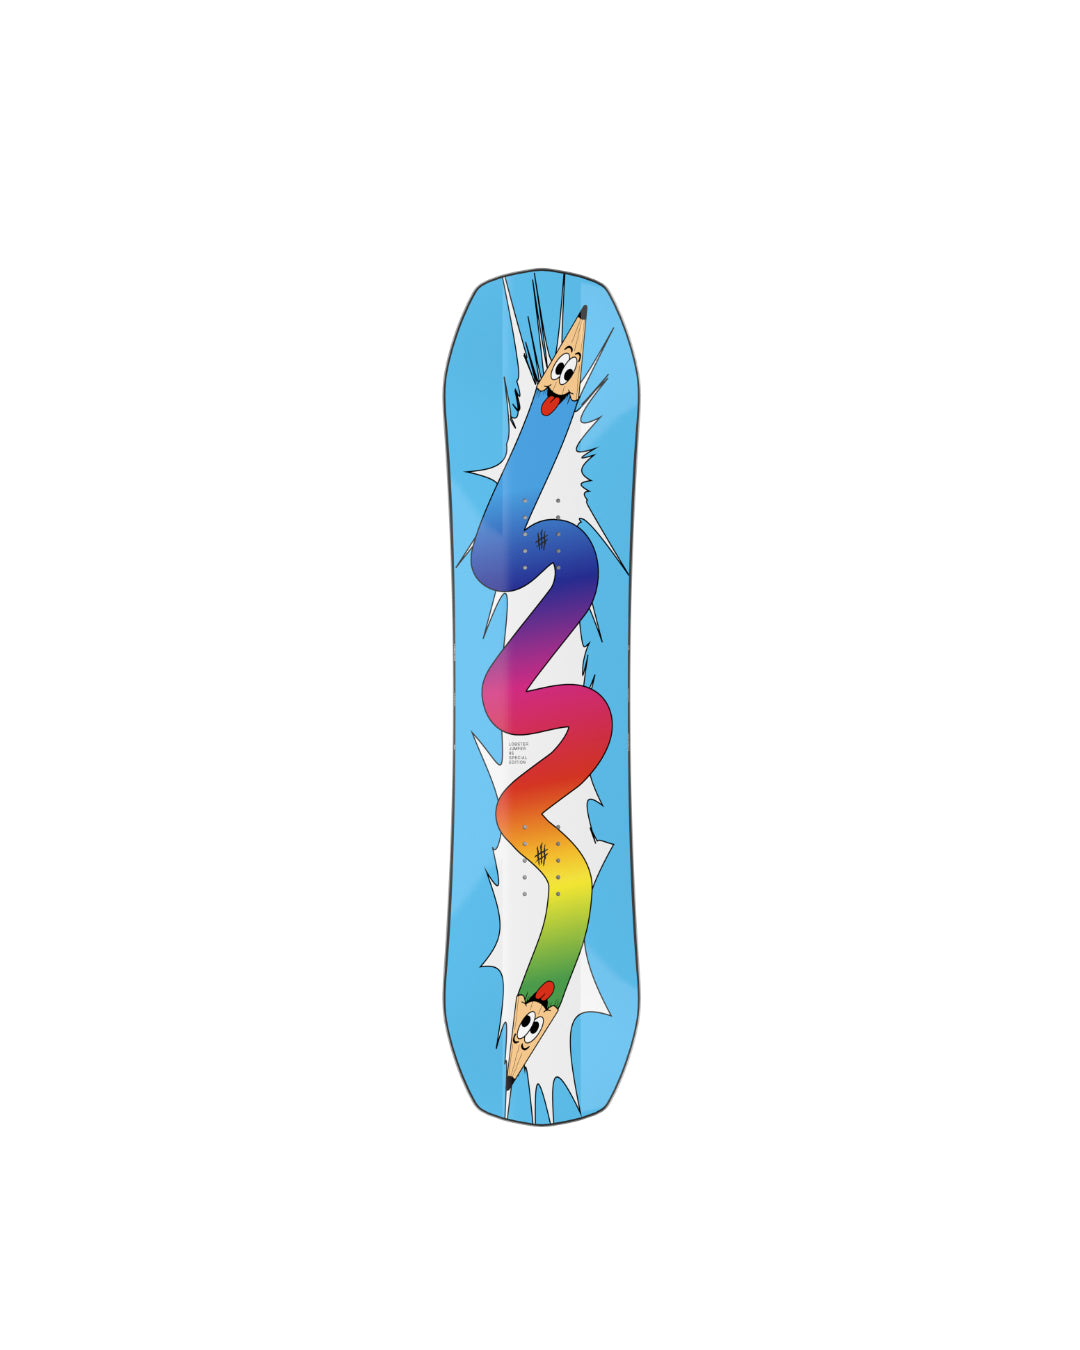 Jumper lobstersnowboards 2023-2024 snowboarding product image